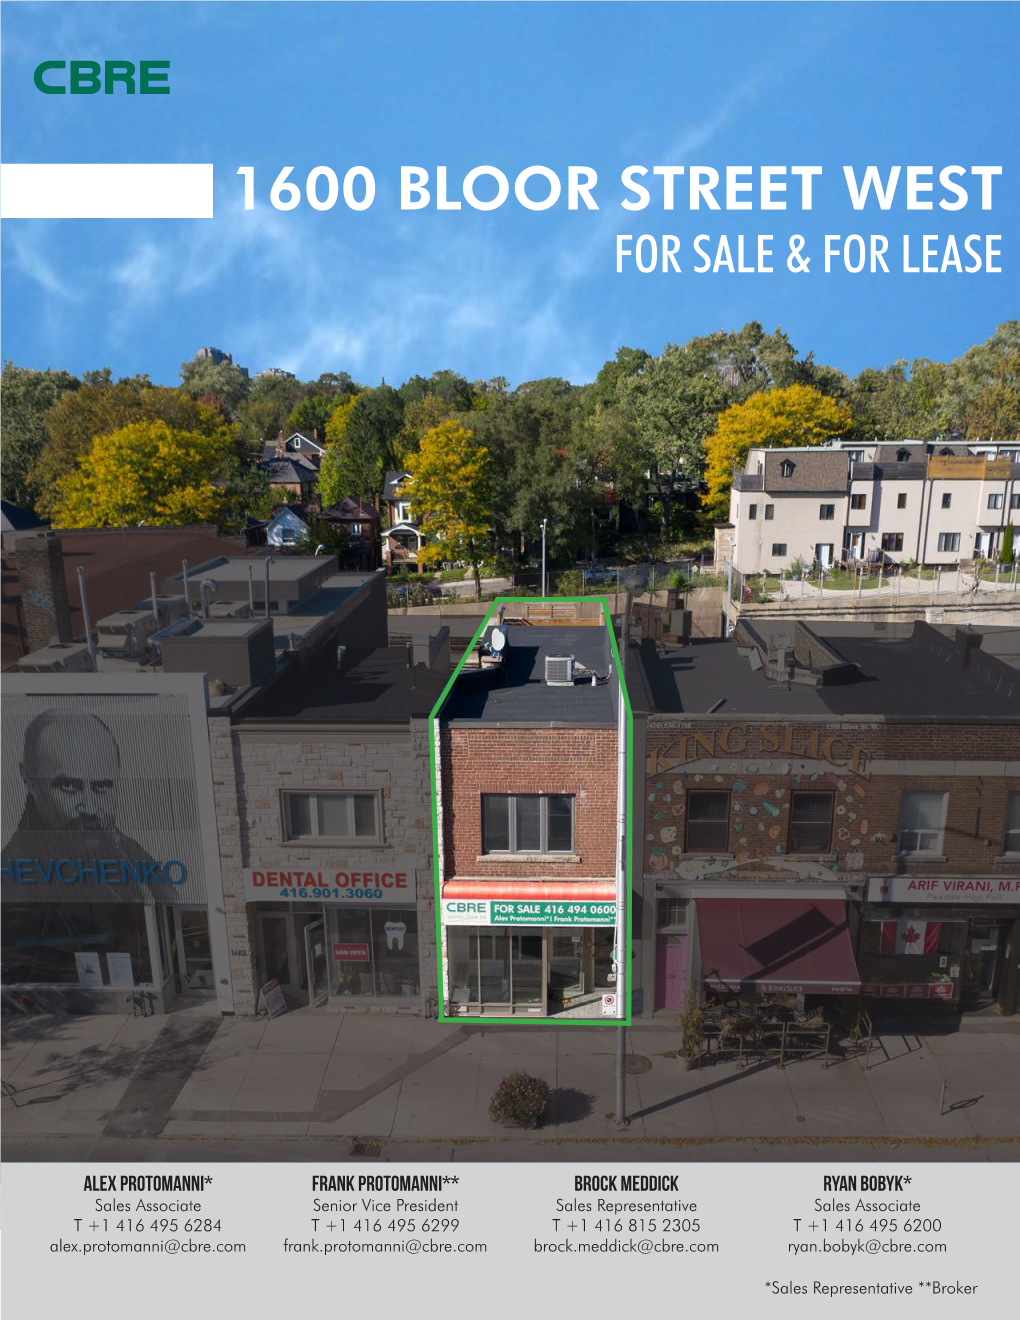 1600 Bloor Street West for Sale & for Lease